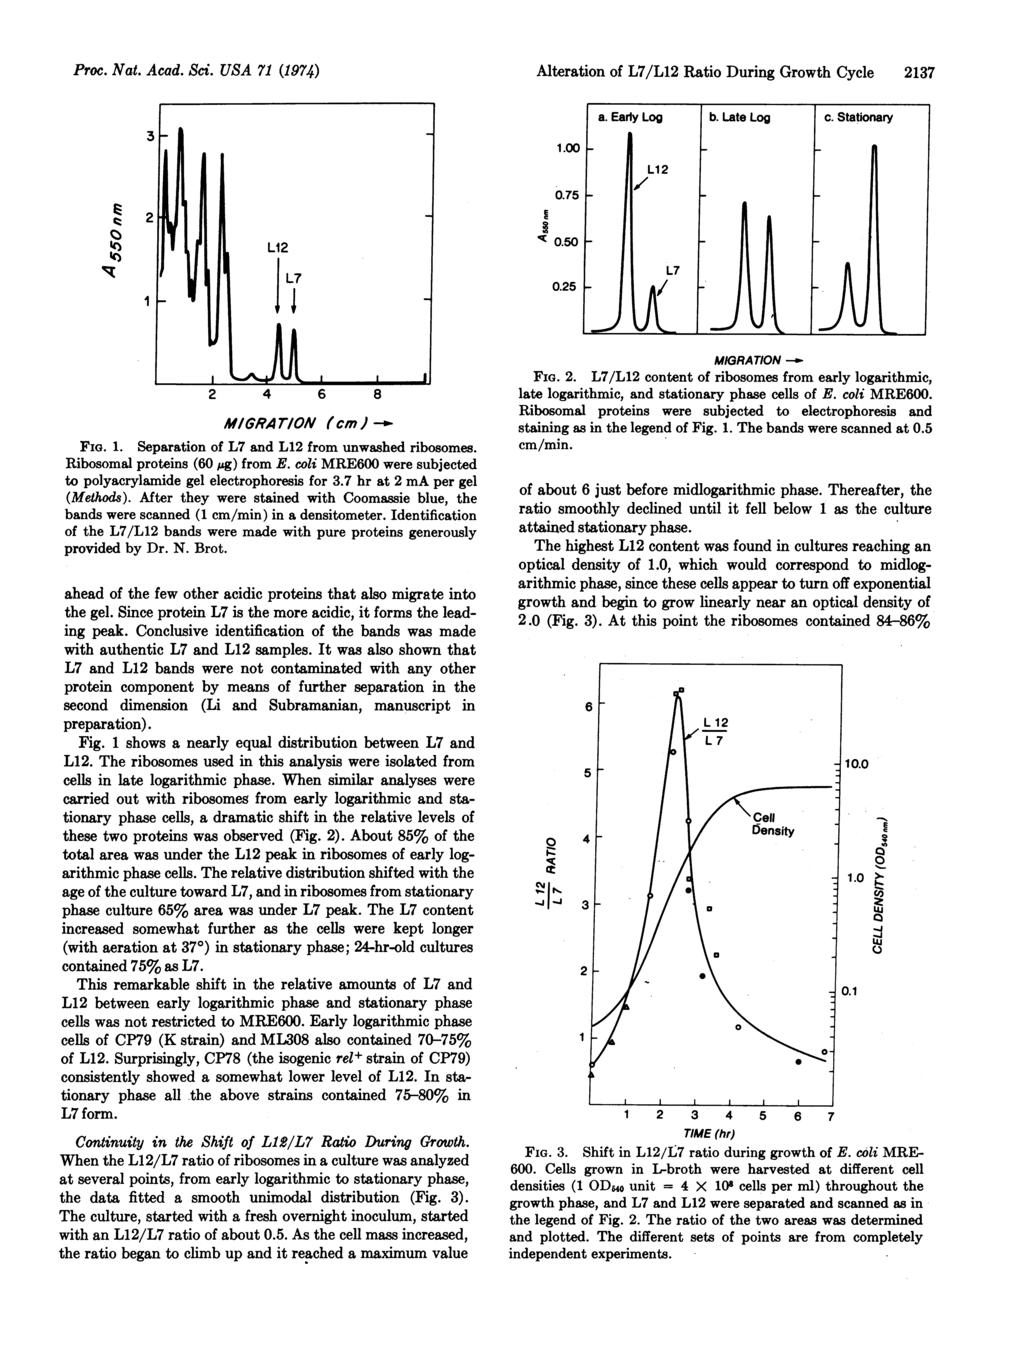 Proc. Nat. Acad. Sci. USA 71 (1974) Alteration of L7/L12 Ratio During Growth Cycle 2137 31 1.00 b. Late Log c. Stationary I') 'C) 2 I E 0.75 "It 0.50 0.25 I1i t 2 4 6 8 MIGRA TION (cm) --* FIG. 1. Separation of L7 and L12 from unwashed ribosomes.